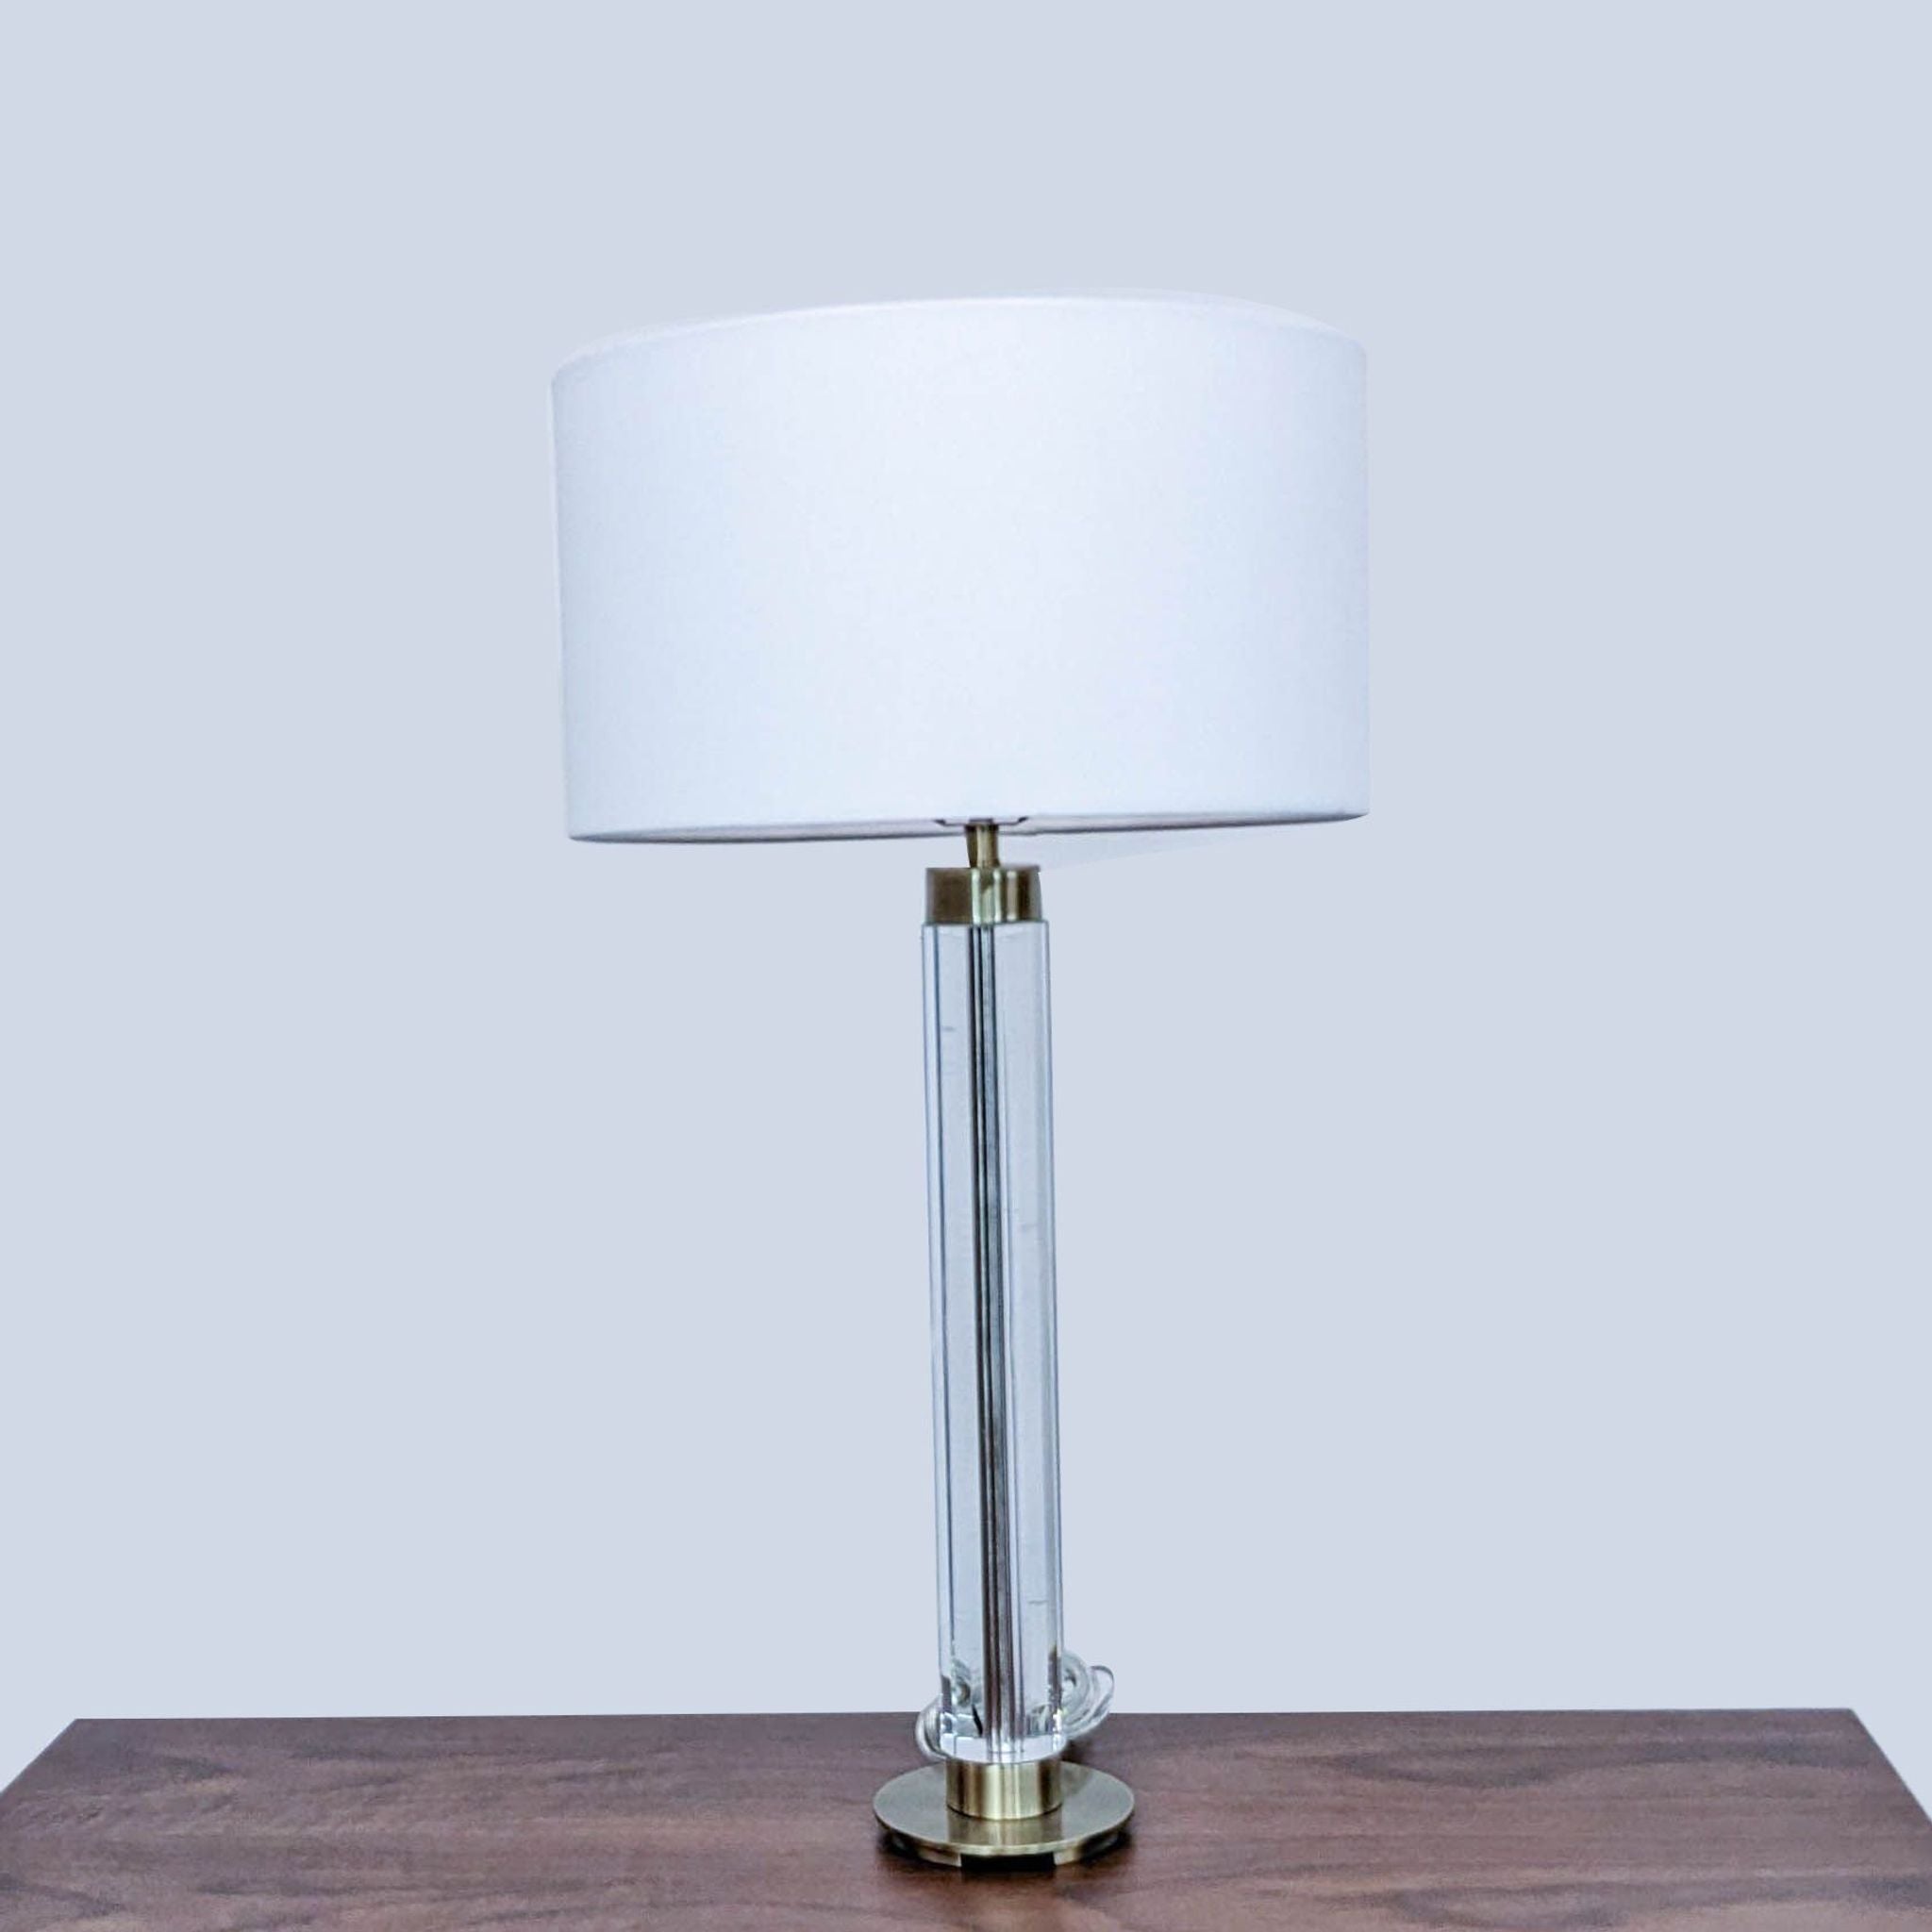 Reperch brand table lamp with clear cylindrical body and white shade on wooden surface.